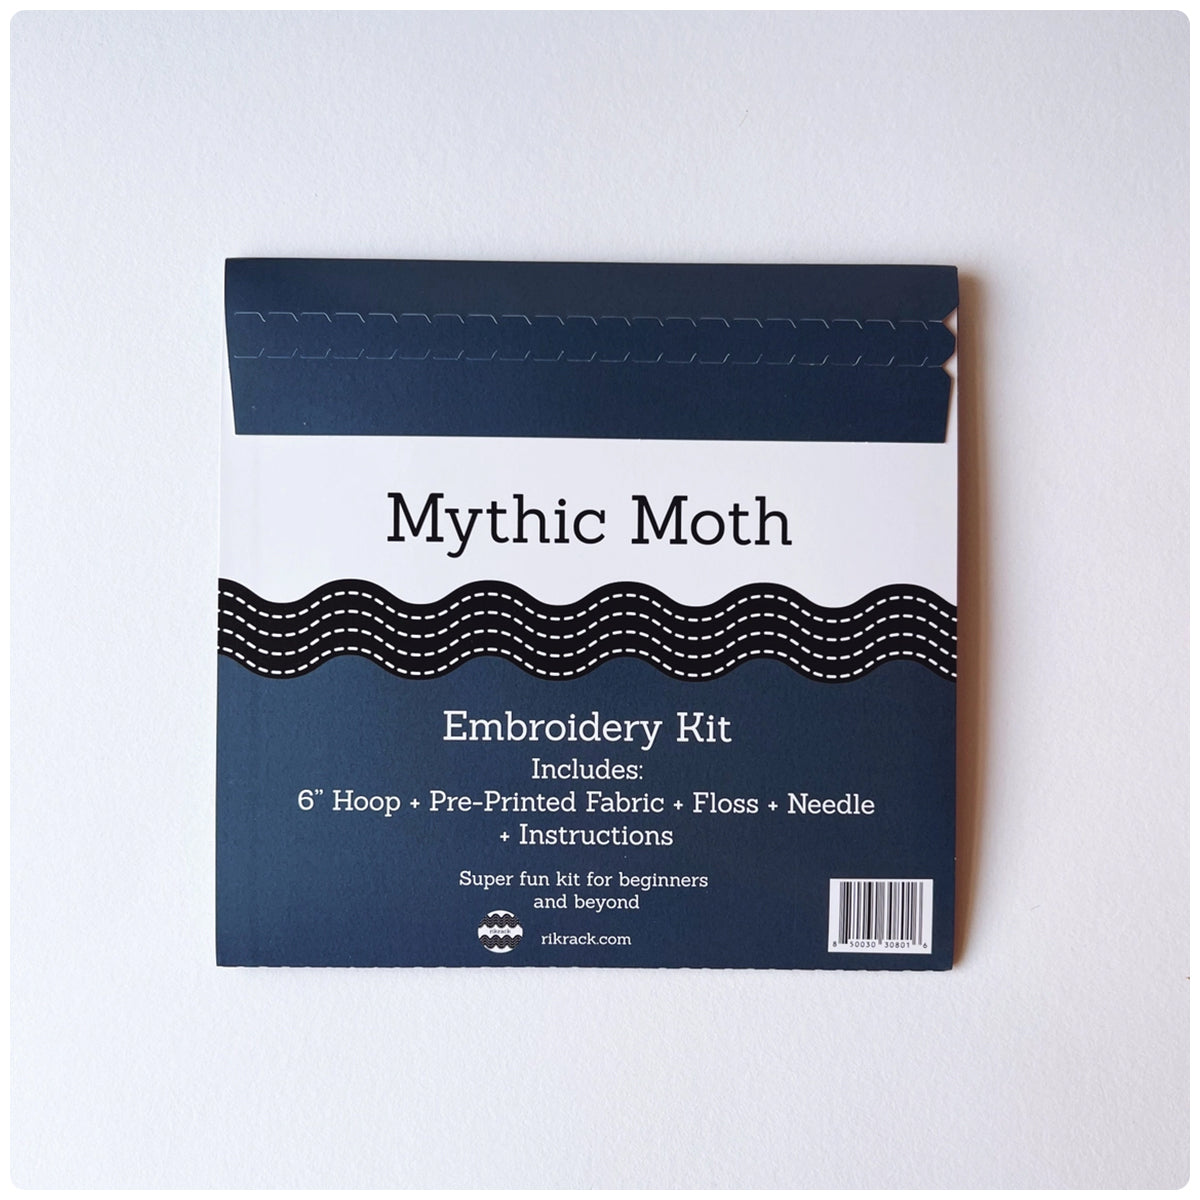 Mythic Moth Embroidery Kit